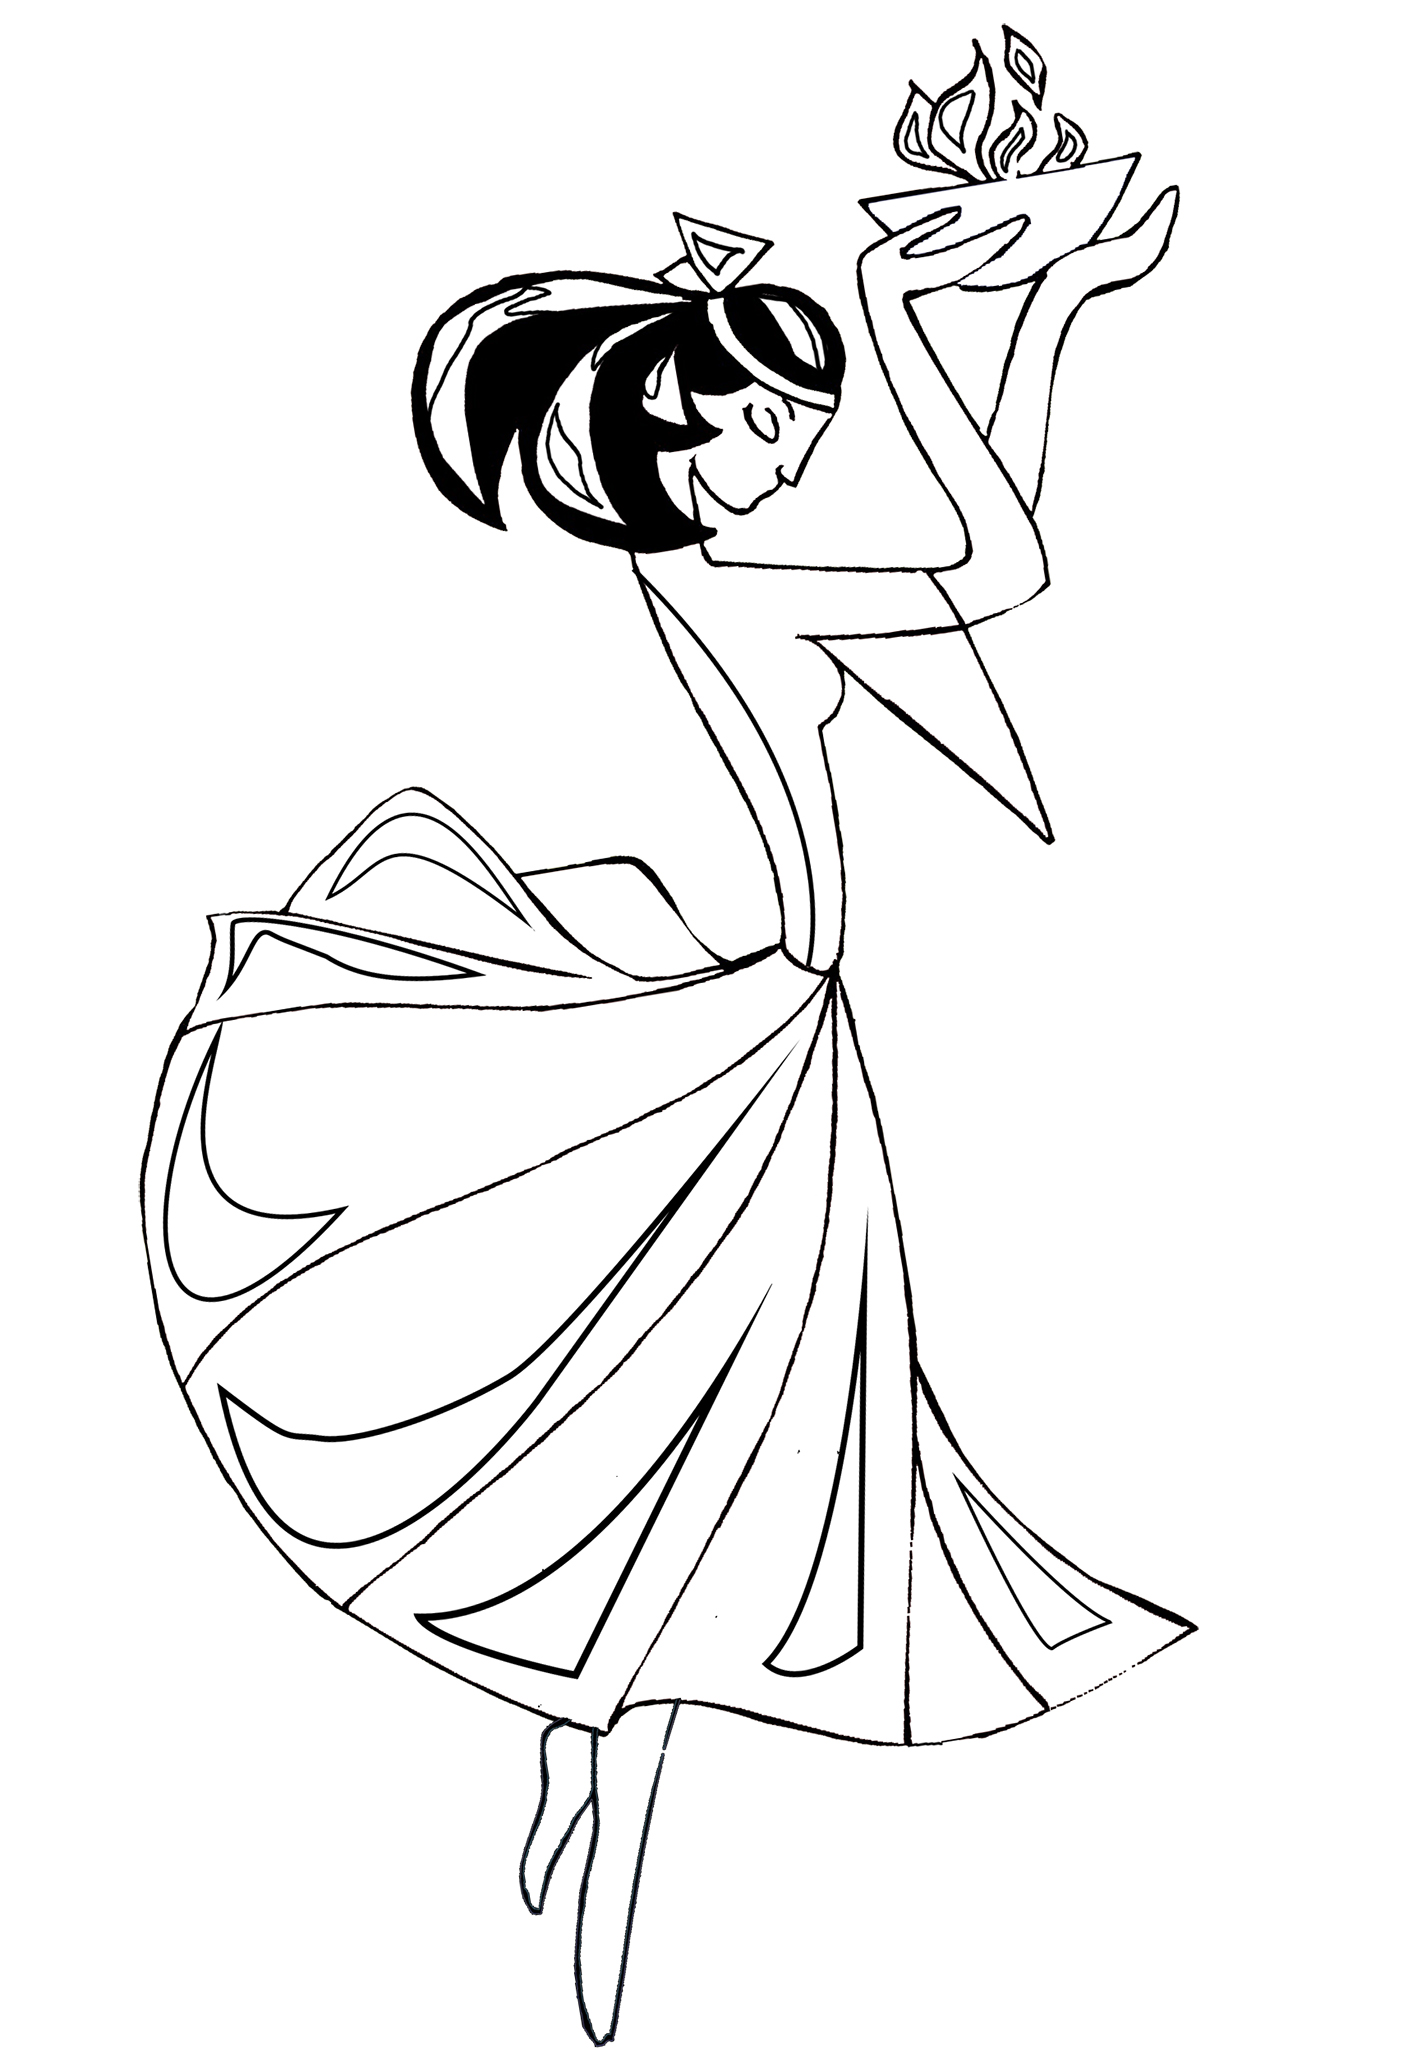 coloring page with Greek dancer